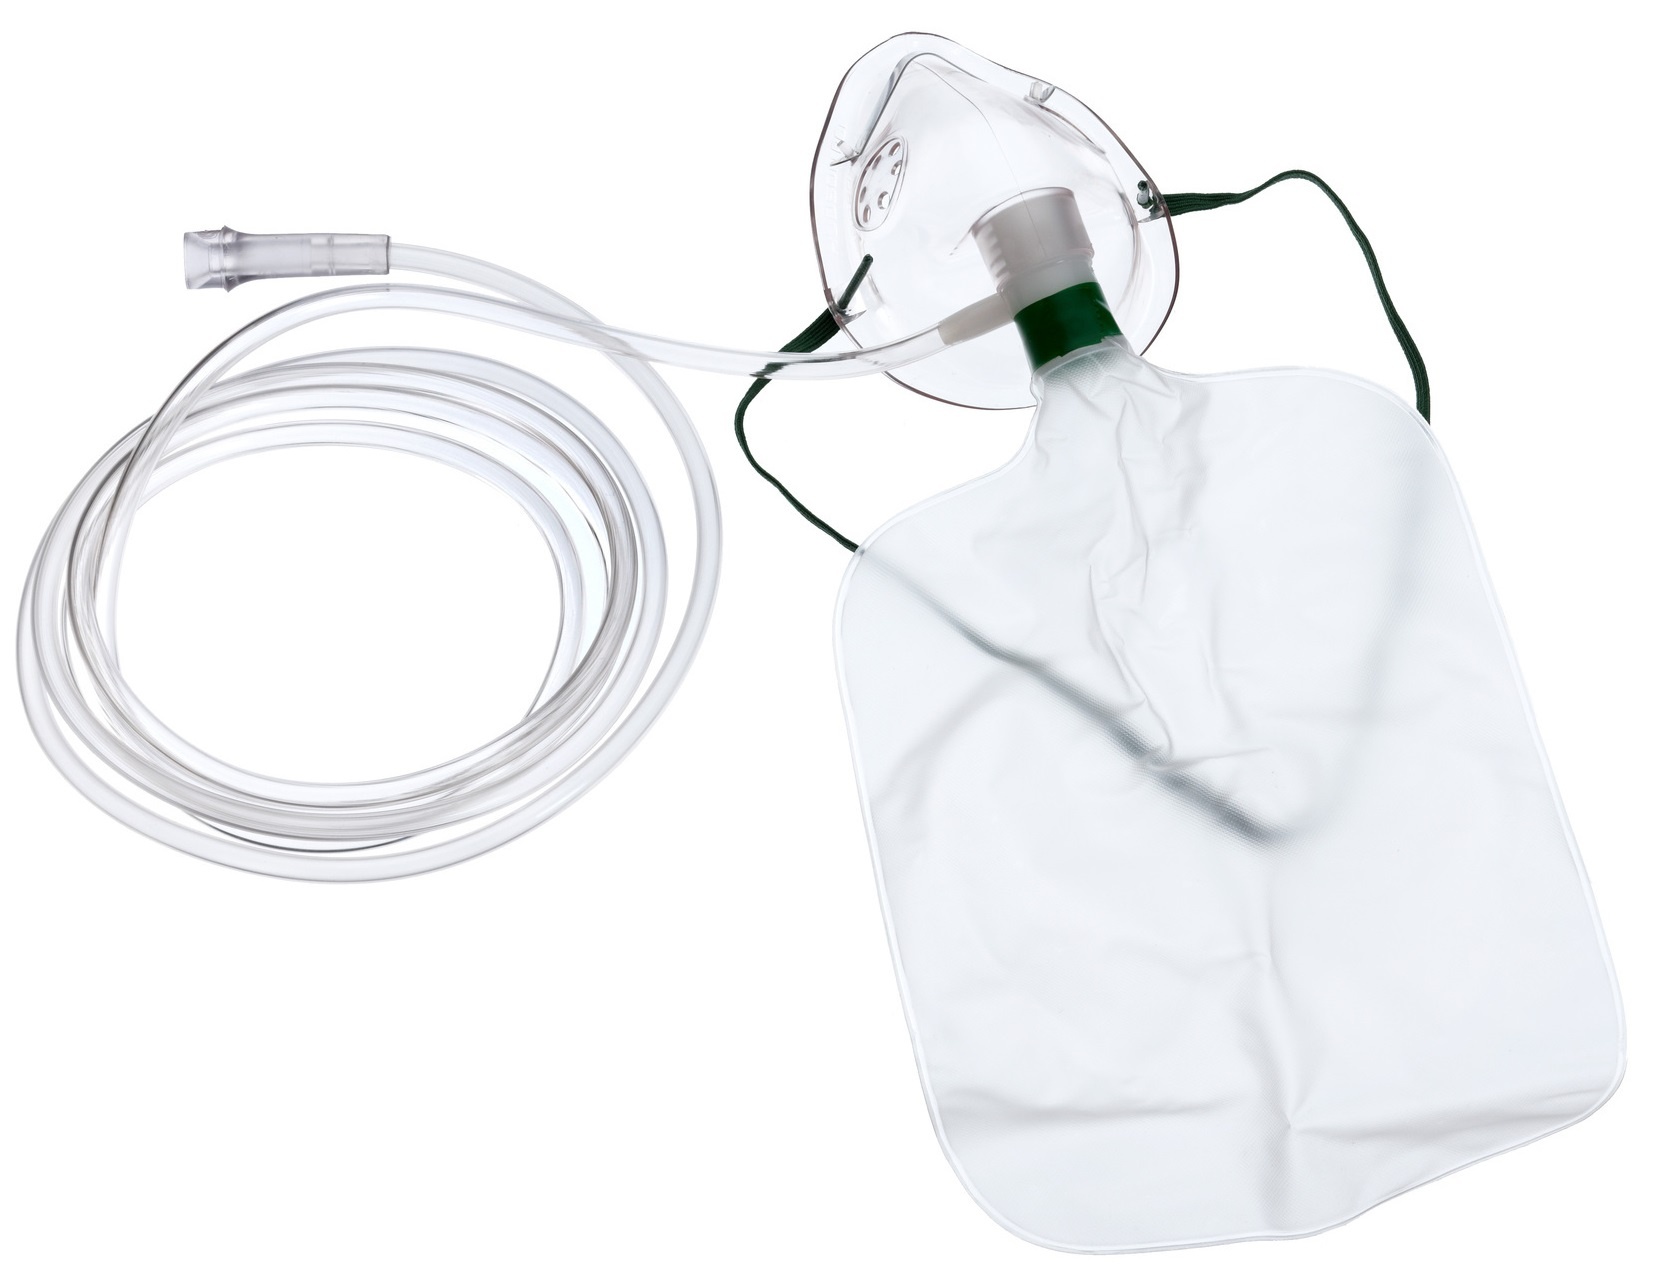 Hudson Mask High Concentration Elongated with 7ft Oxygen Tubing ...